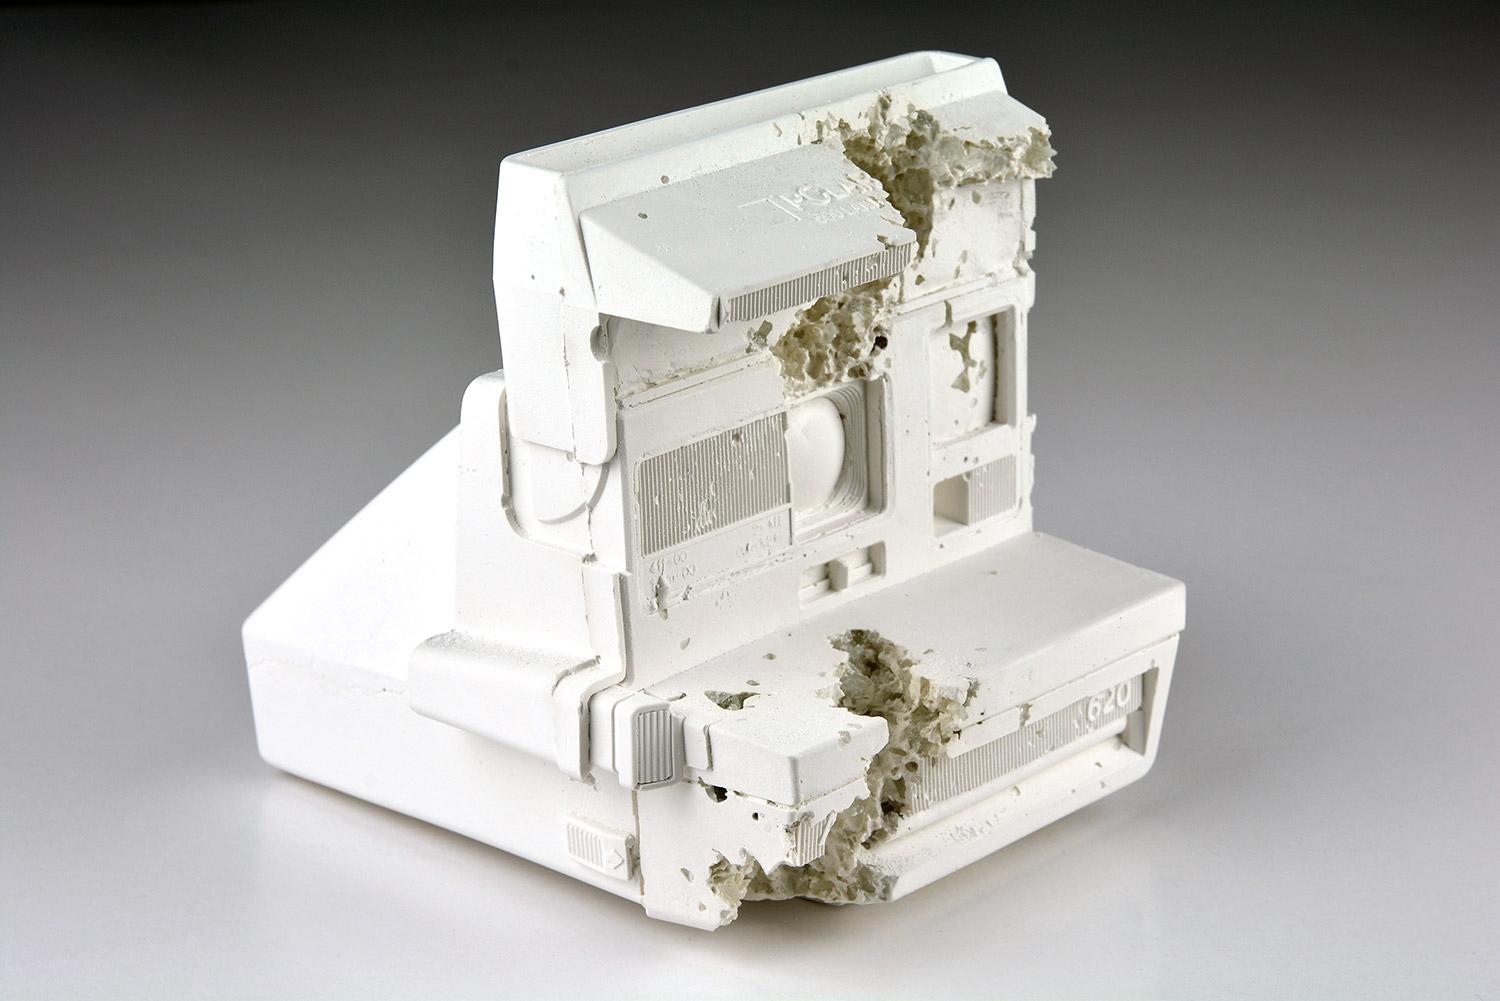 Daniel Arsham - FUTURE RELIC 06 - POLAROID CAMERA

Date of creation: 2016
Medium: Plaster and crushed glass
Edition number: 251/500
Size: 12.7 × 14.6 × 14 cm
Condition: In mint conditions, inside its original package. Never displayed, the box has